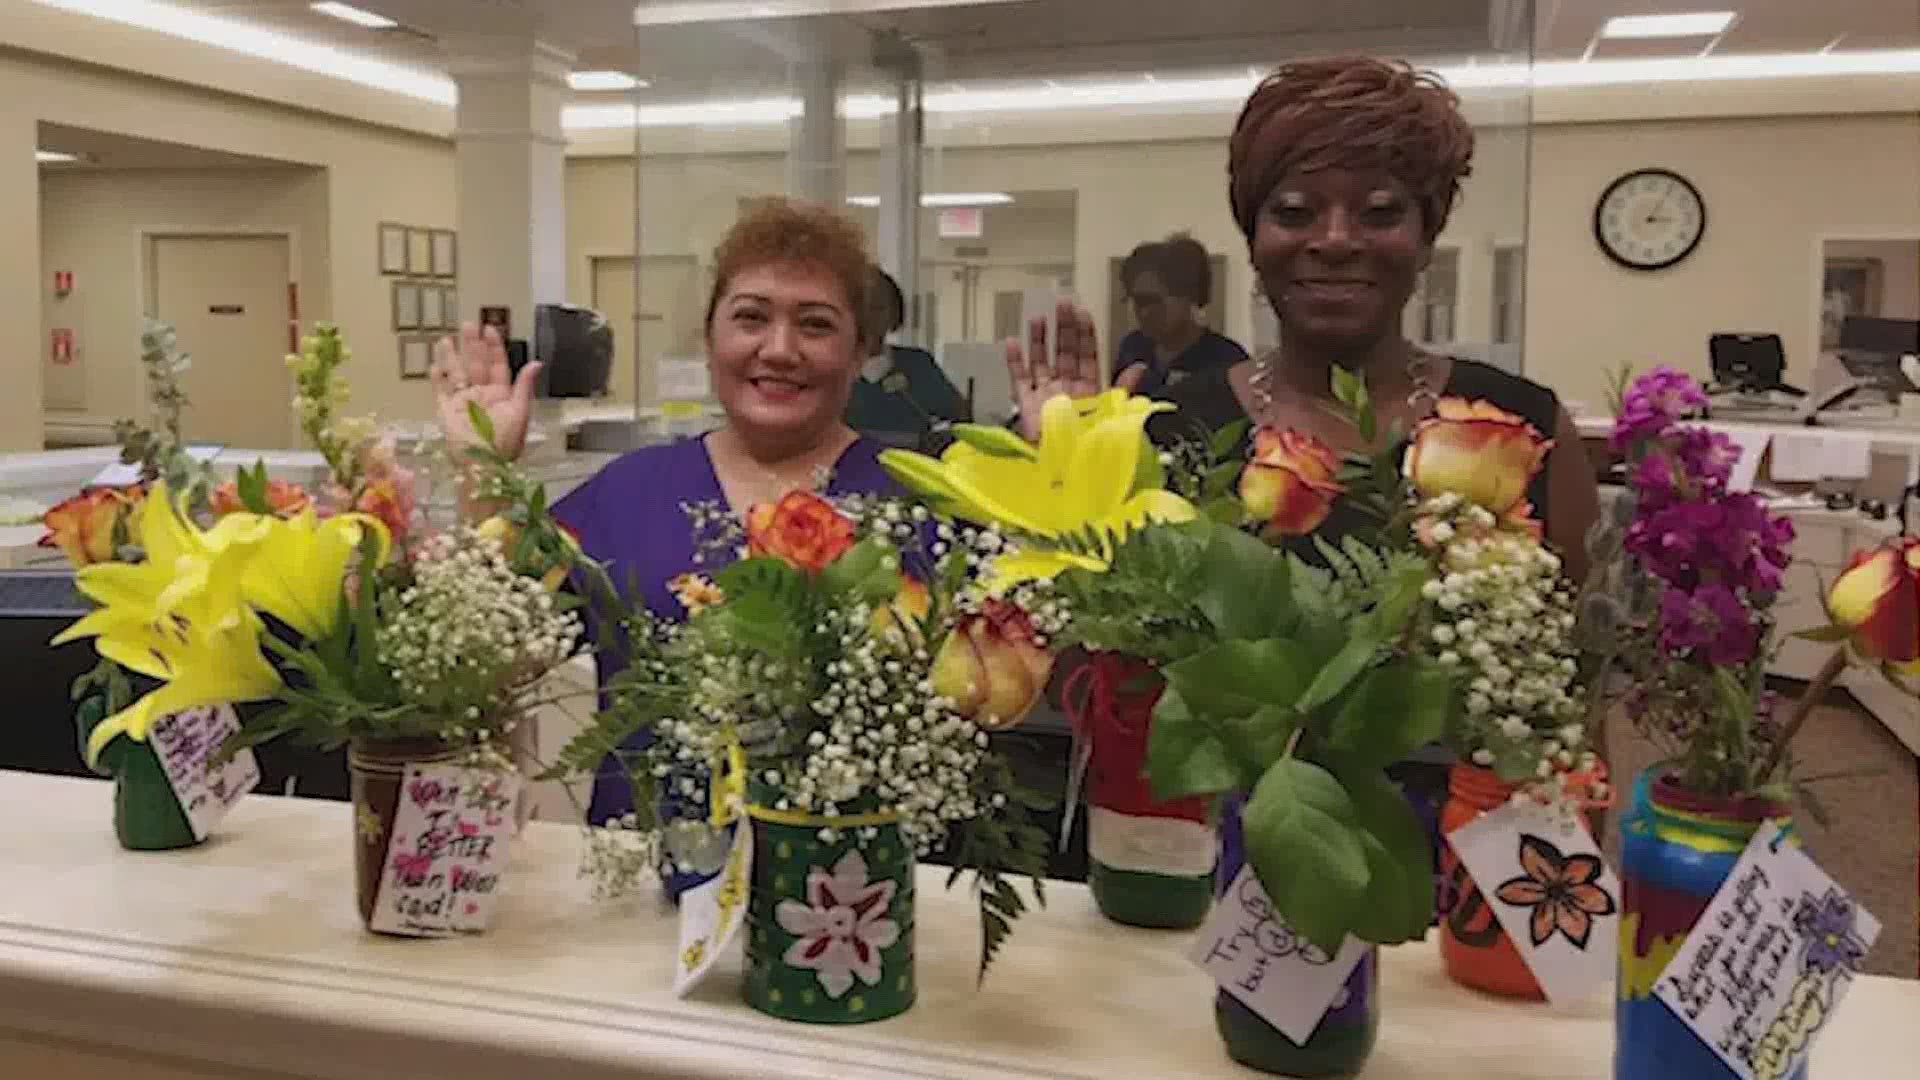 Lindsey Smith, a former wedding planner, began repurposing flowers in 2010. Volunteers help create and deliver blooms to hospitals and shelters.